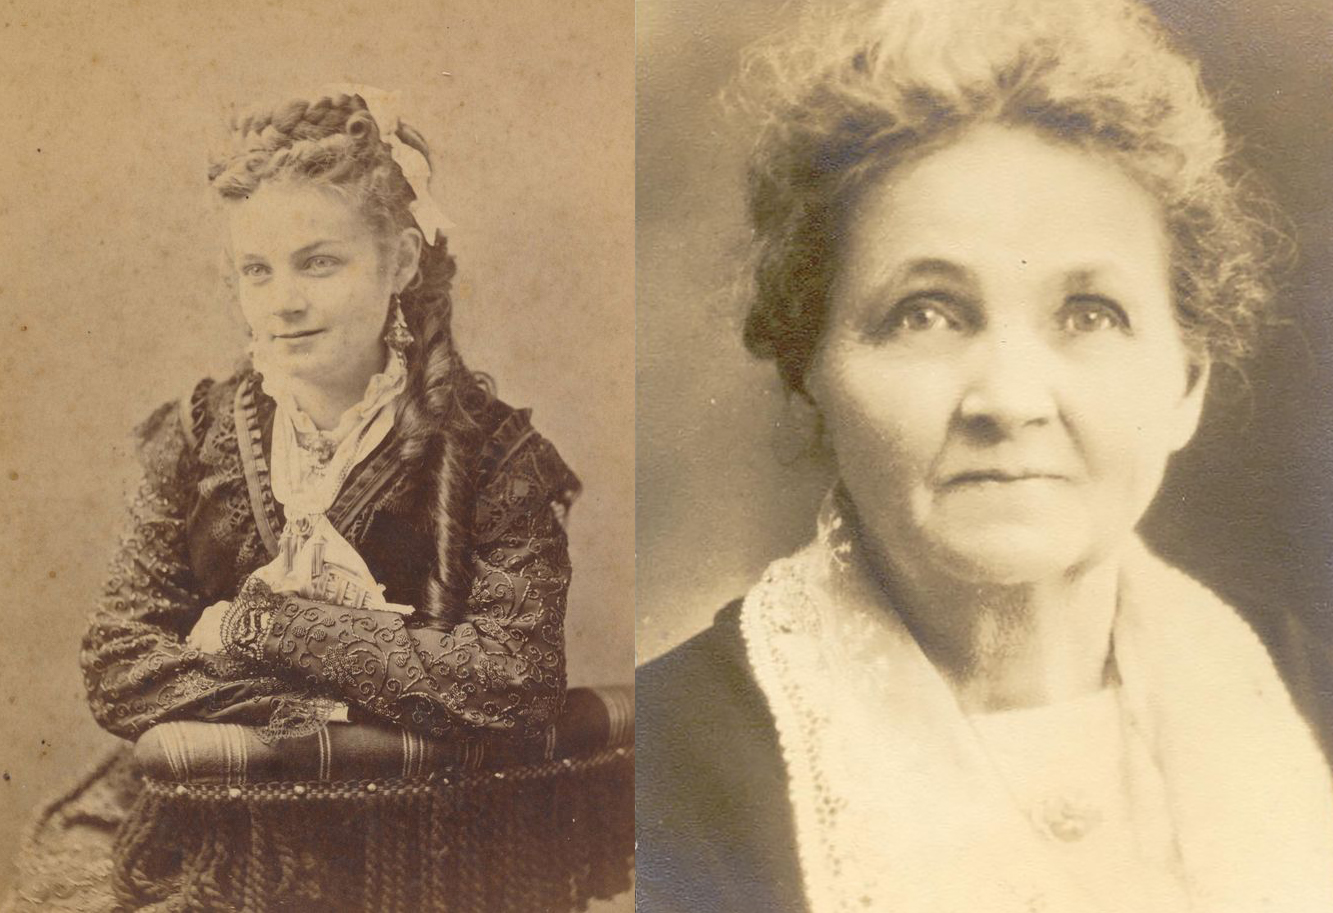 Sepia portraits of a Euro-American woman in her youth, on the left, with her hair in curls and a small smile, looking to lower left, and as an older woman, on the right, with her hair up, looking into the camera.